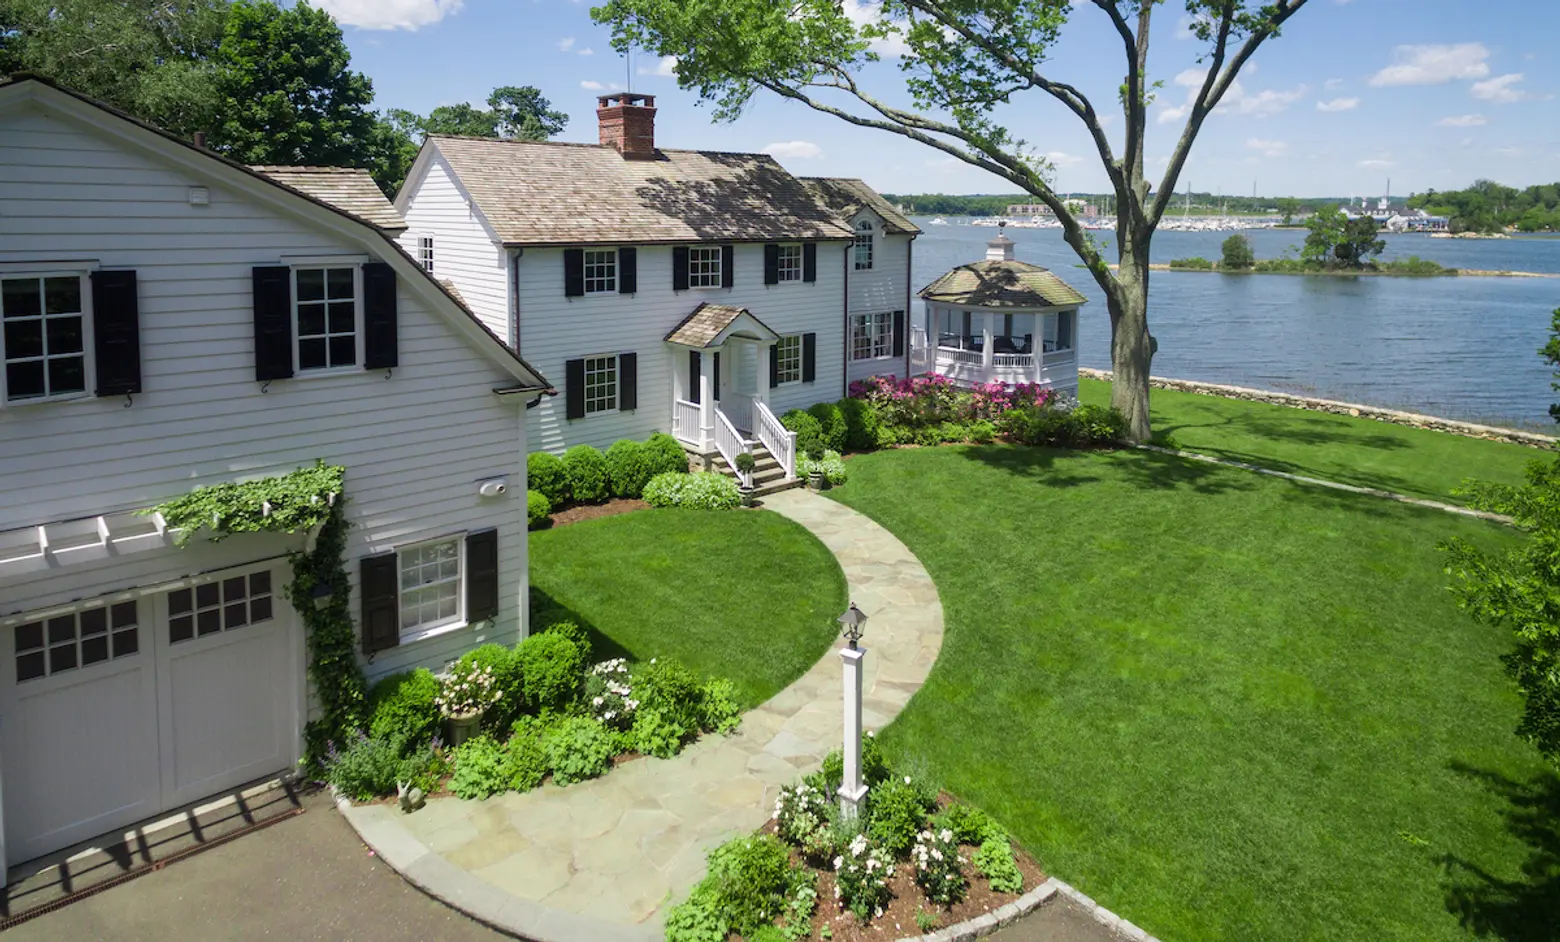 This waterfront Connecticut home comes with a private island for $6.25M